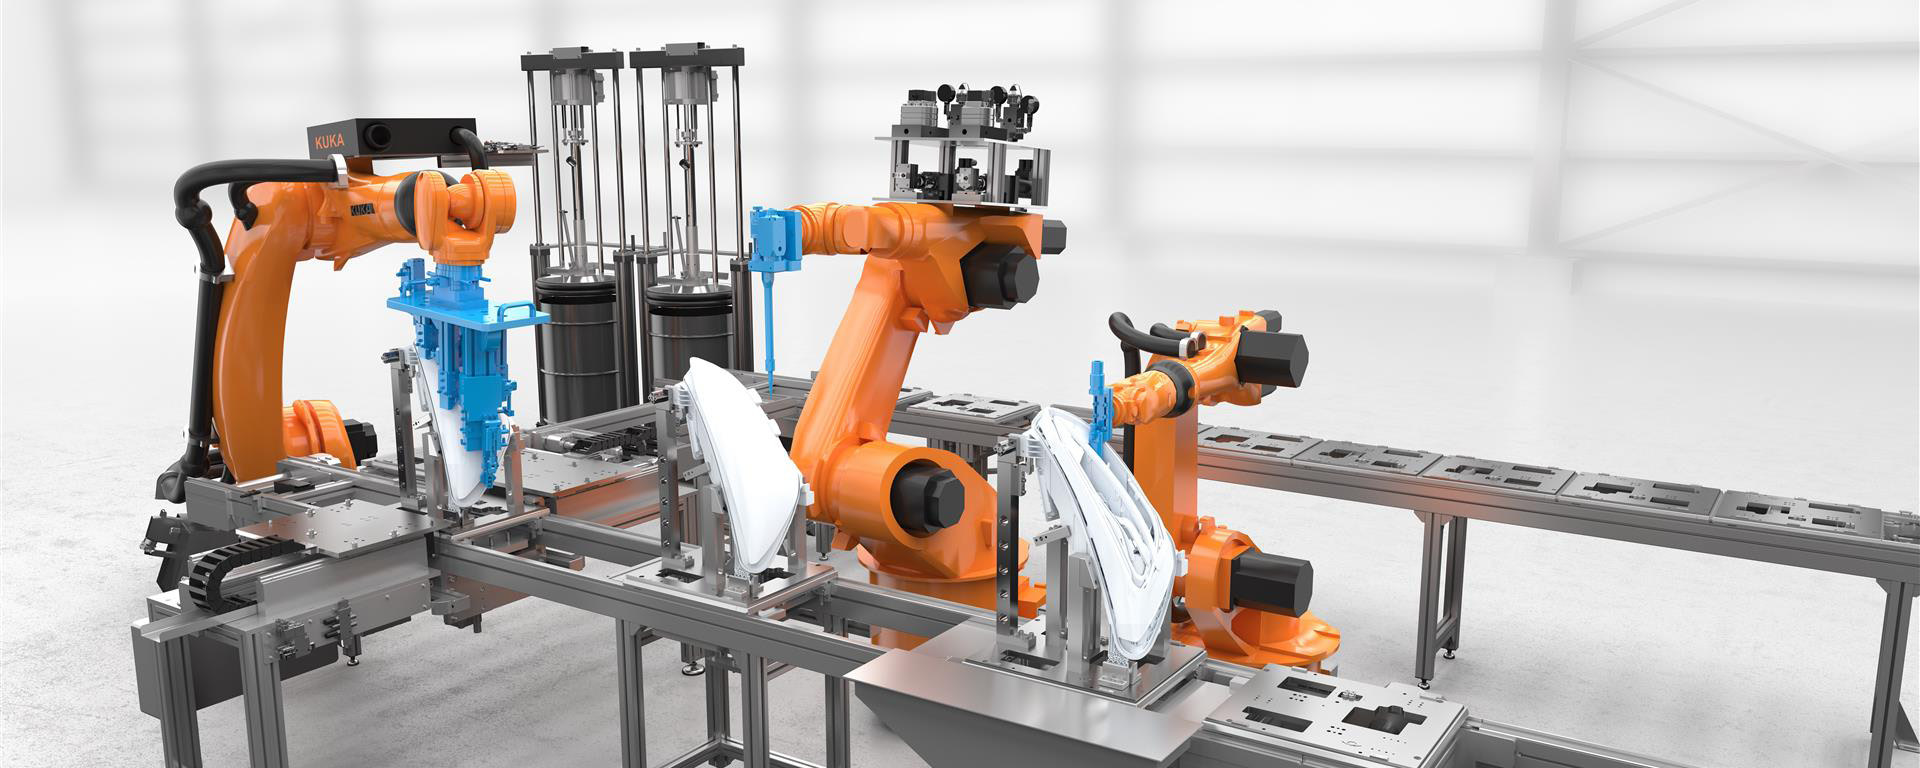 Robotic gluing solutions